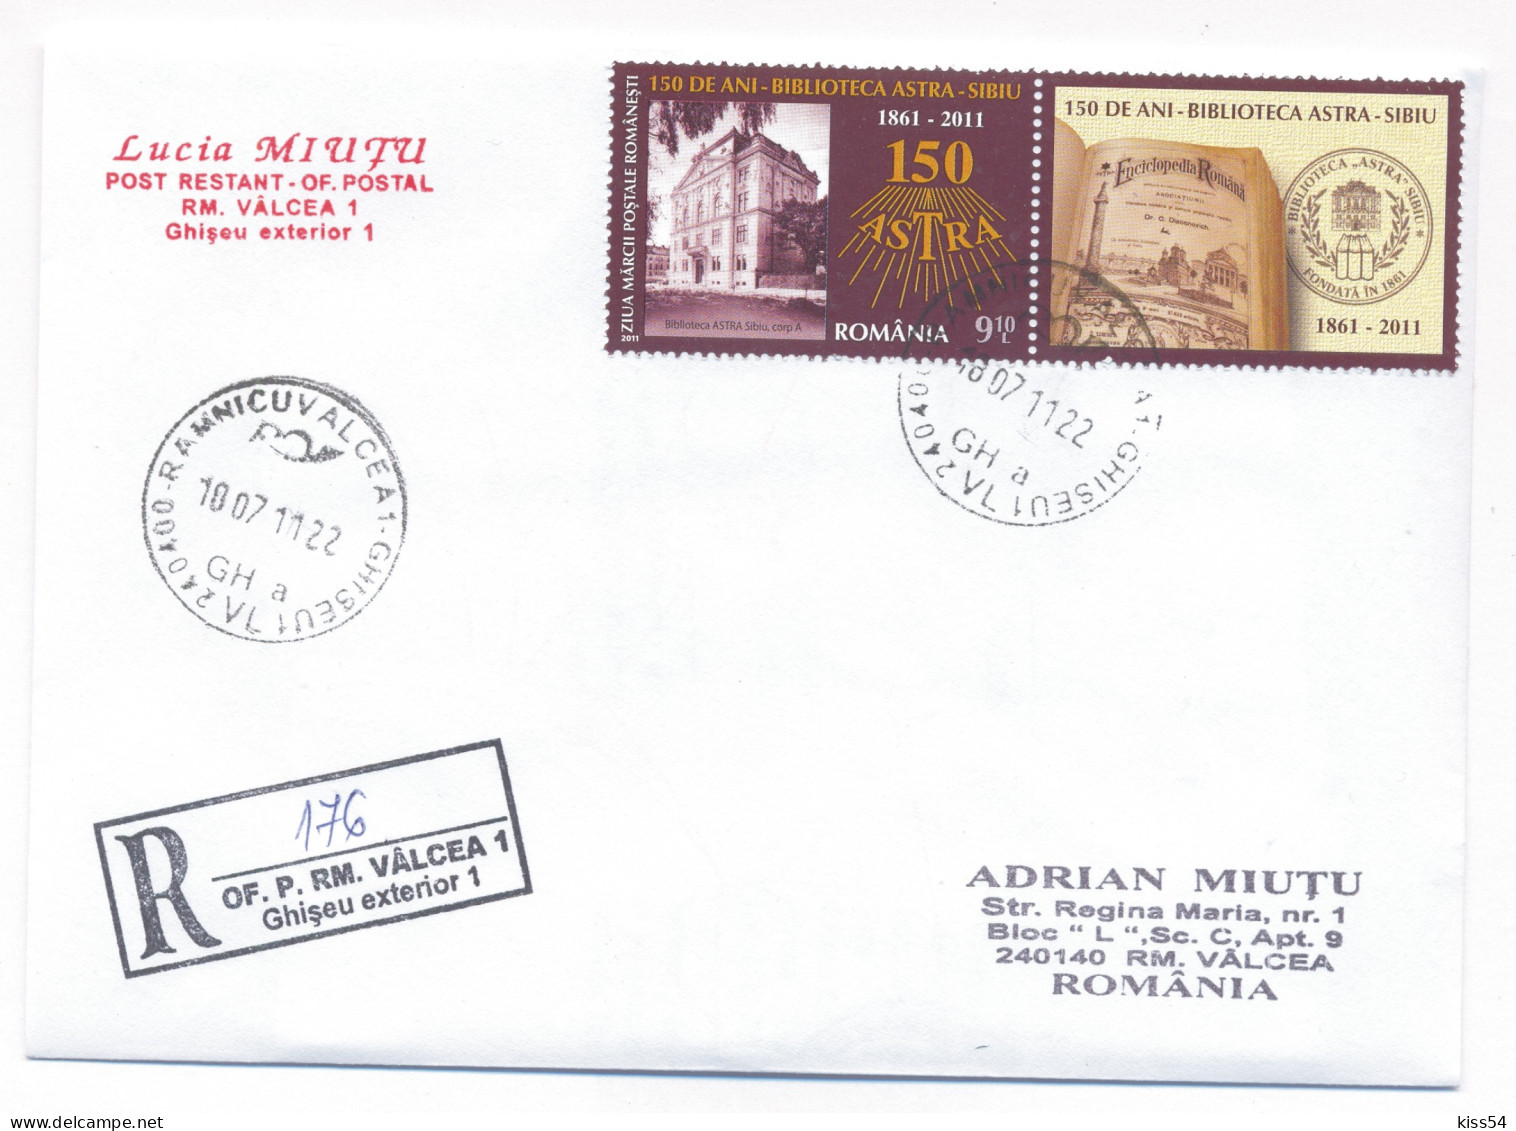 CP 16 - 176-a ASTRA LIBRARY, Sibiu, Romania, 150 Years - Registered, Stamp With Vignette - 2011 - Cartas & Documentos